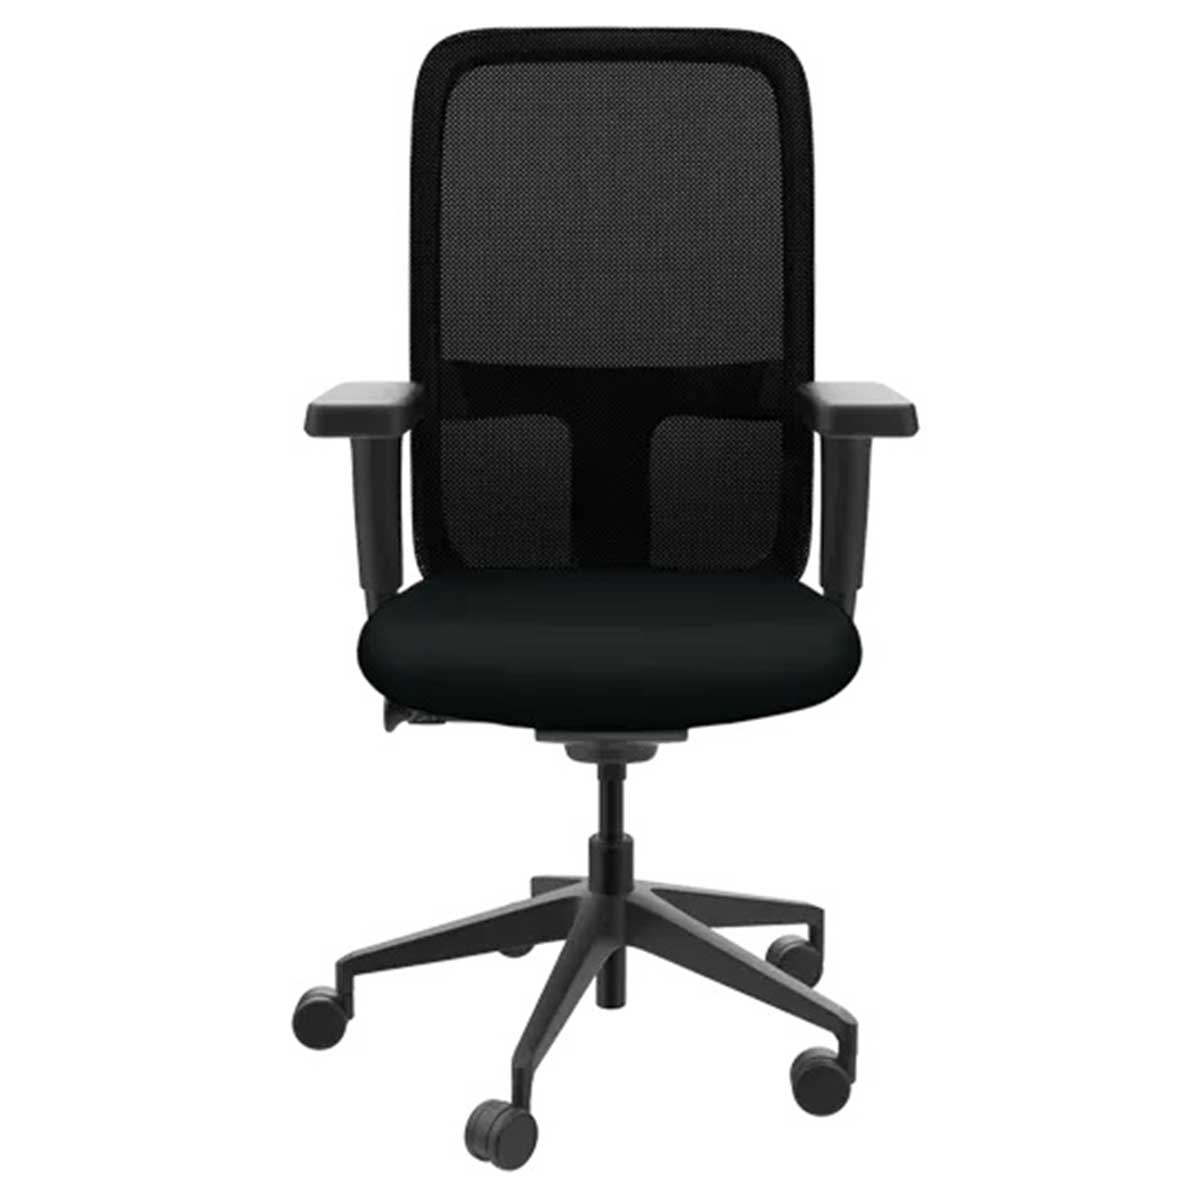 Revolving Chair Manufacturers, Suppliers in Rohini Sector 11